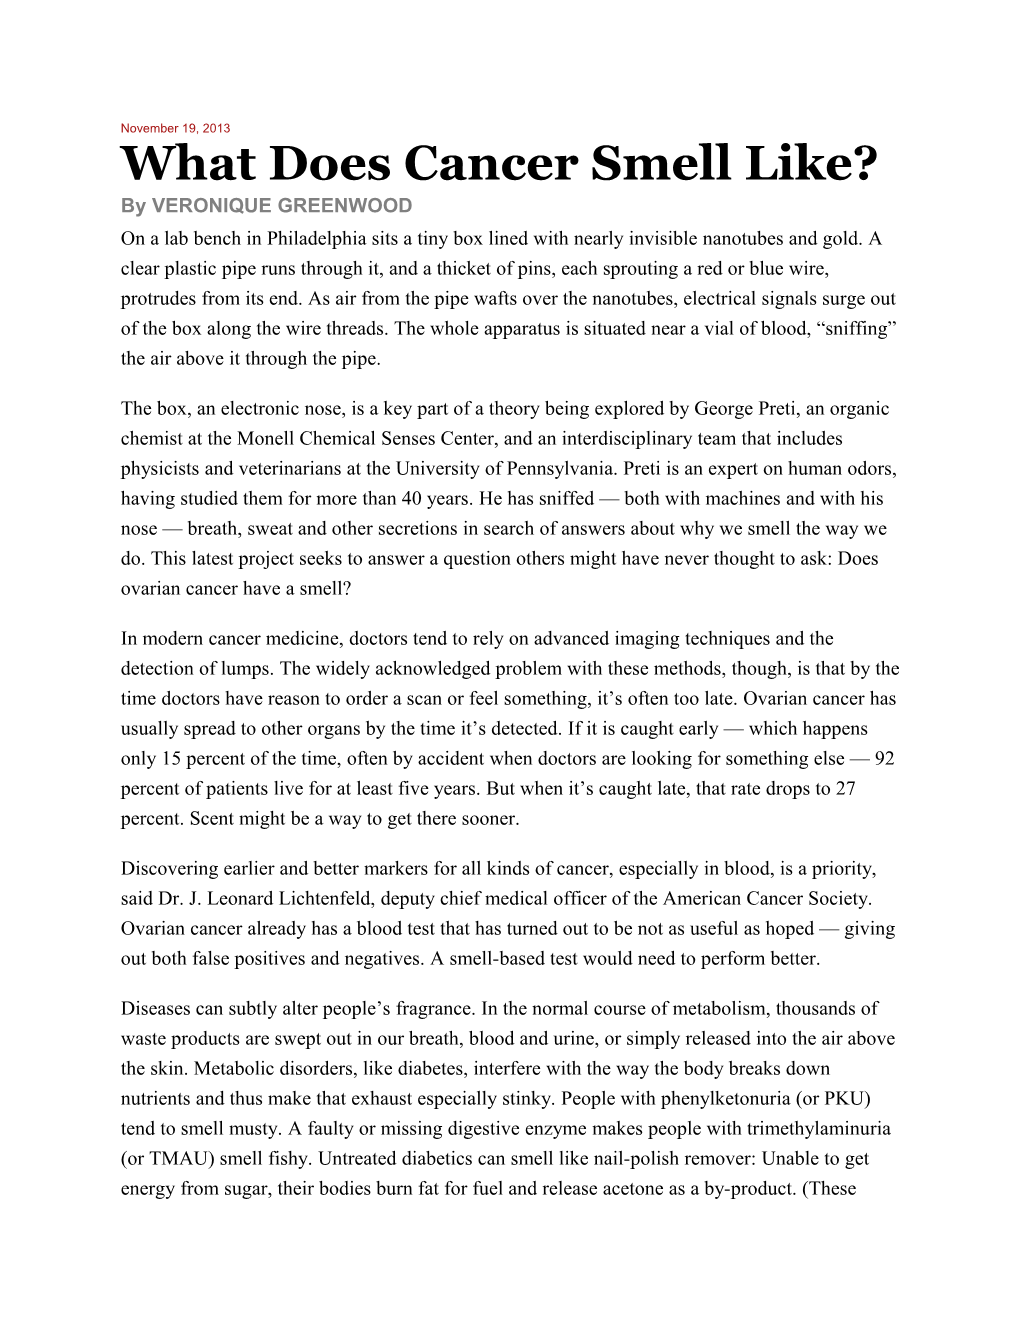 What Does Cancer Smell Like?